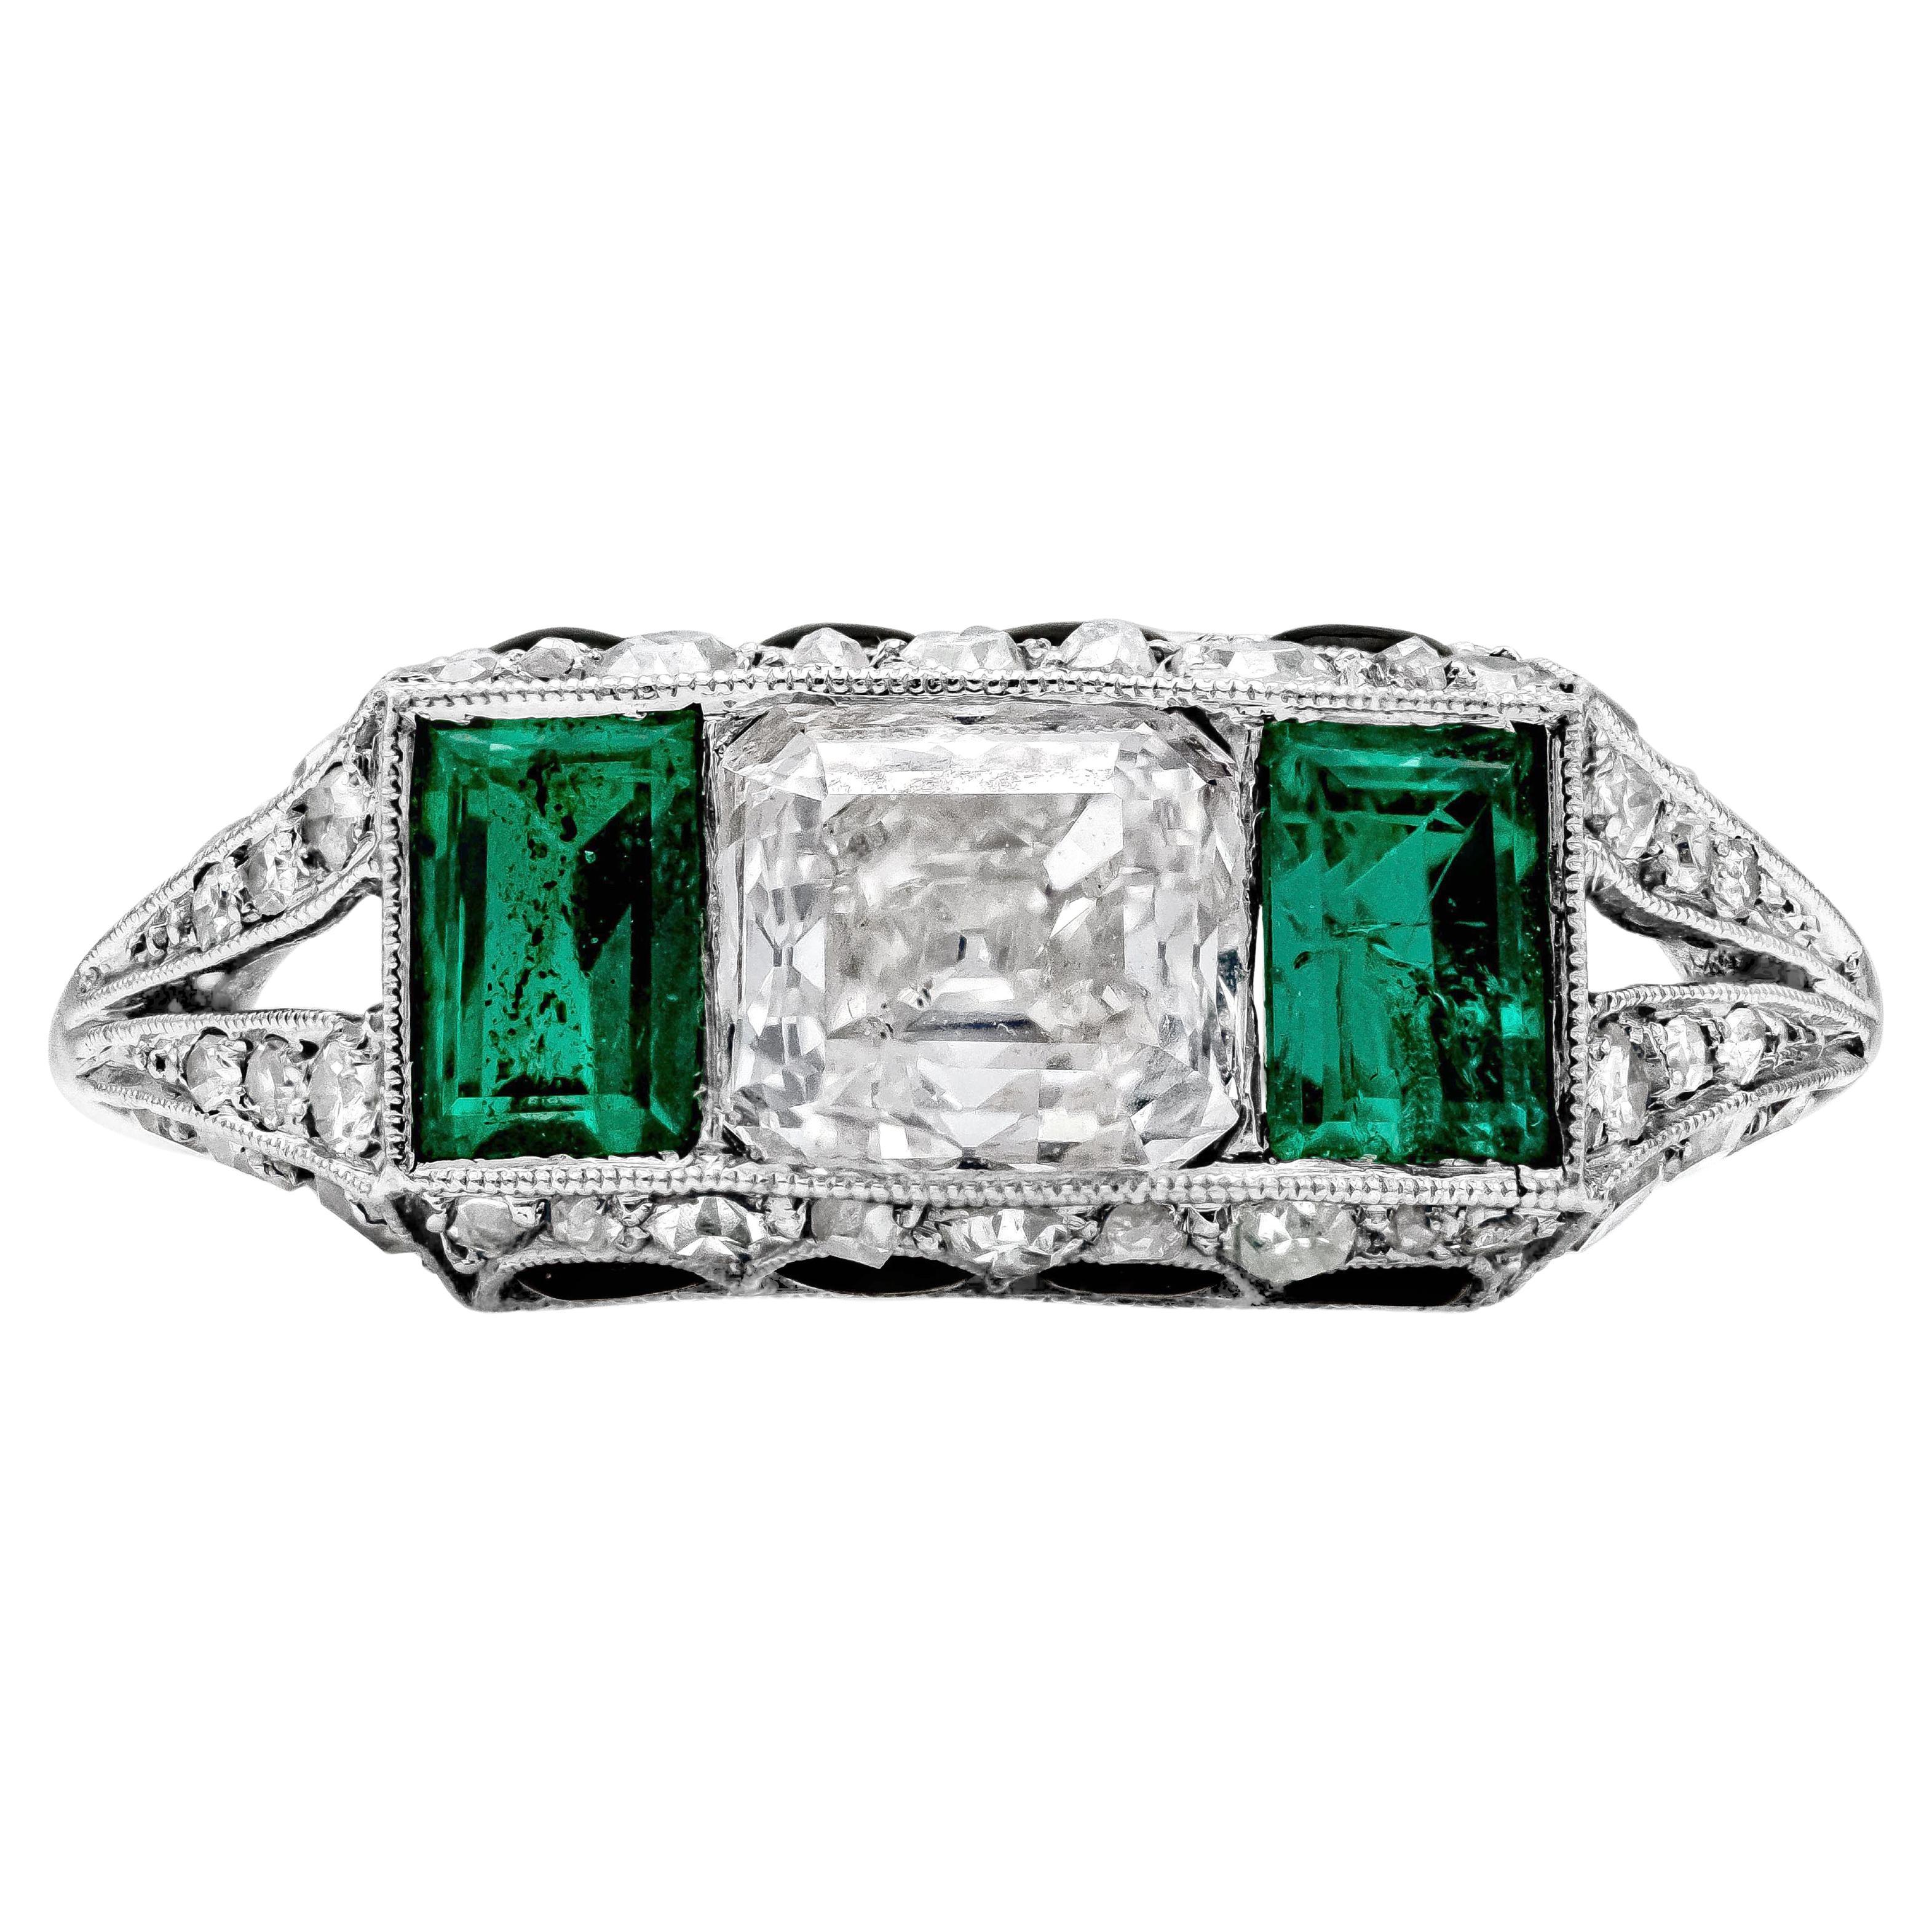 1.00 Carats Asscher Cut Diamond, Emerald and Onyx Antique Engagement Ring For Sale